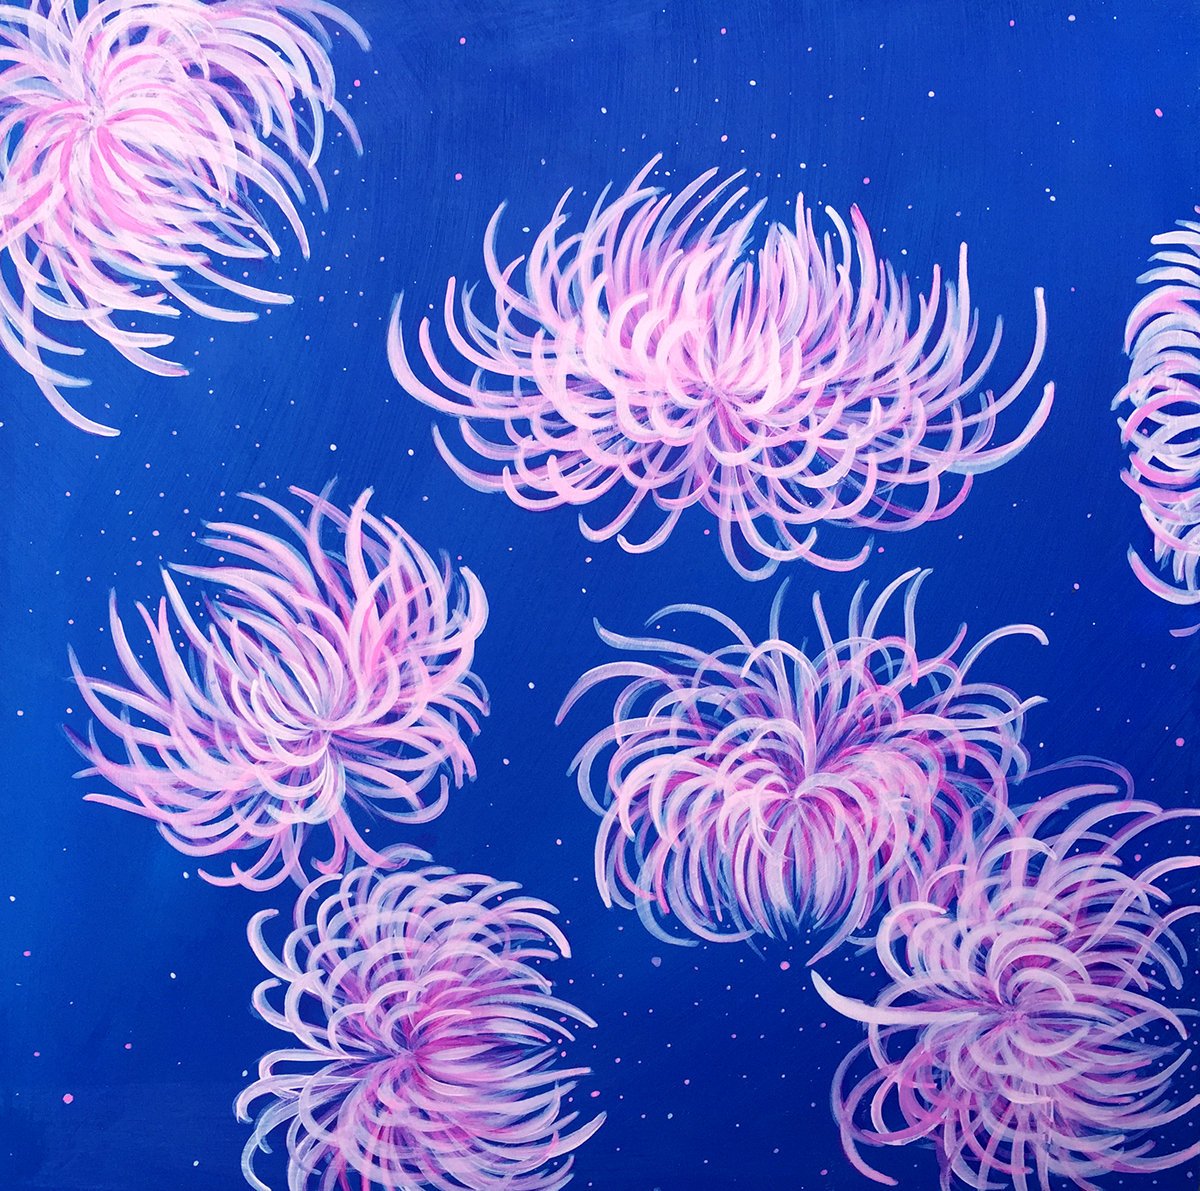 Chrysanthemum botanical pink blue abstract jellyfish Ocean Flowers pattern Claire Thompson for sale commission